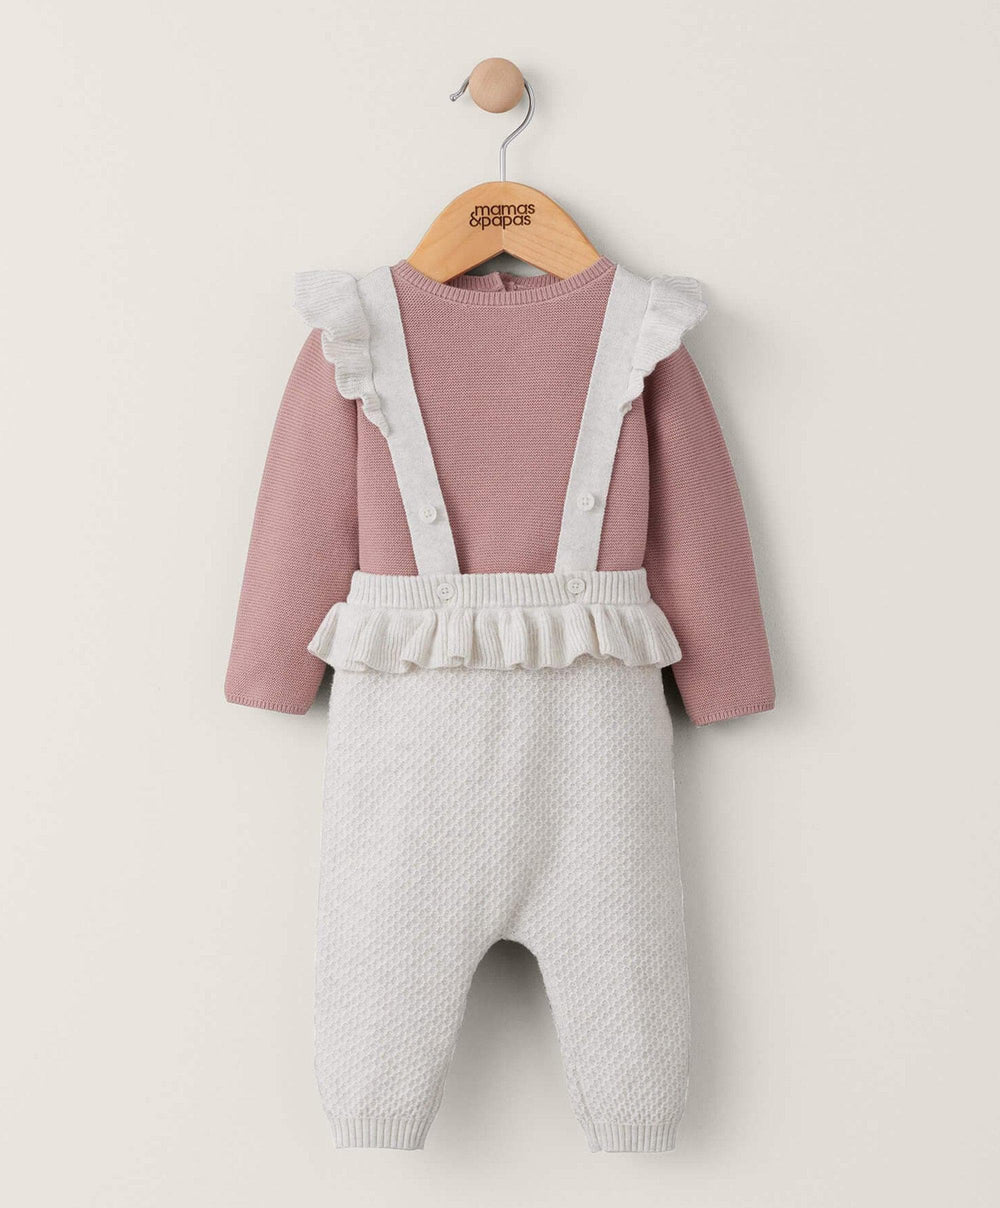 Mamas & Papas Outfits & Sets Frilled Knitted Dungaree Set (2 Piece)